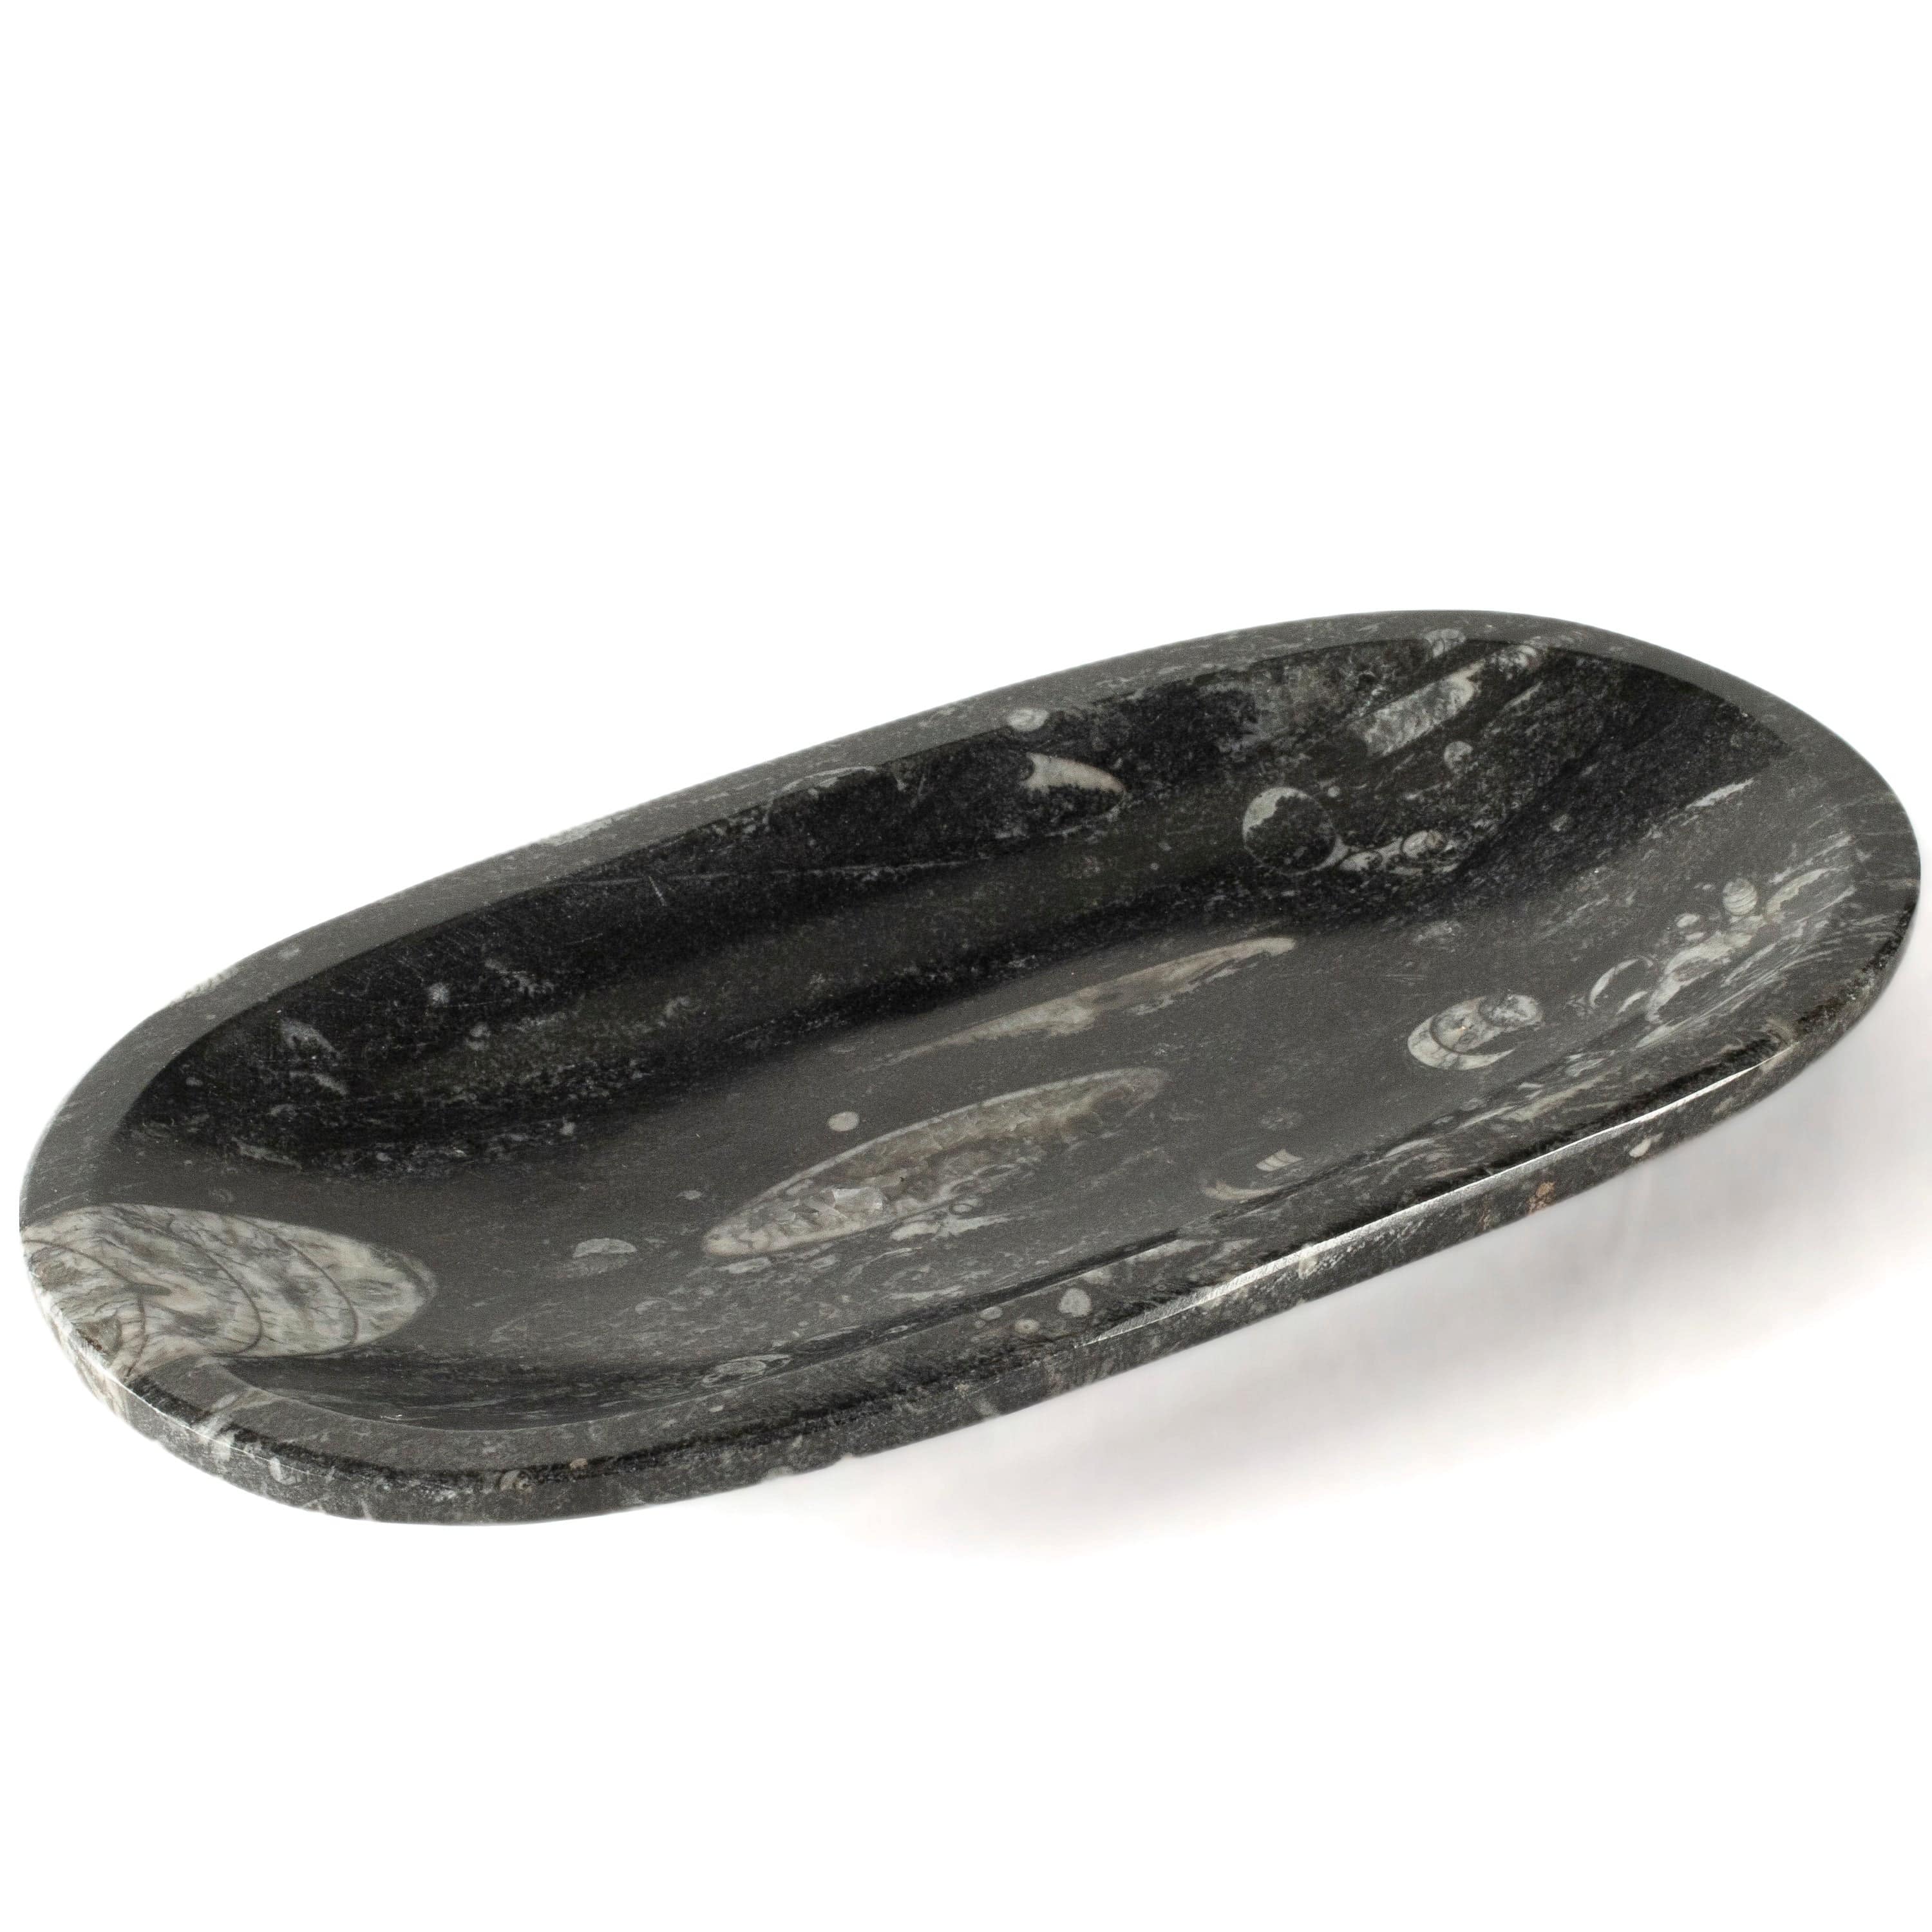 Kalifano Fossils & Minerals Natural Black Orthoceras Oval Bowl from Morocco - 7.5" BORO120